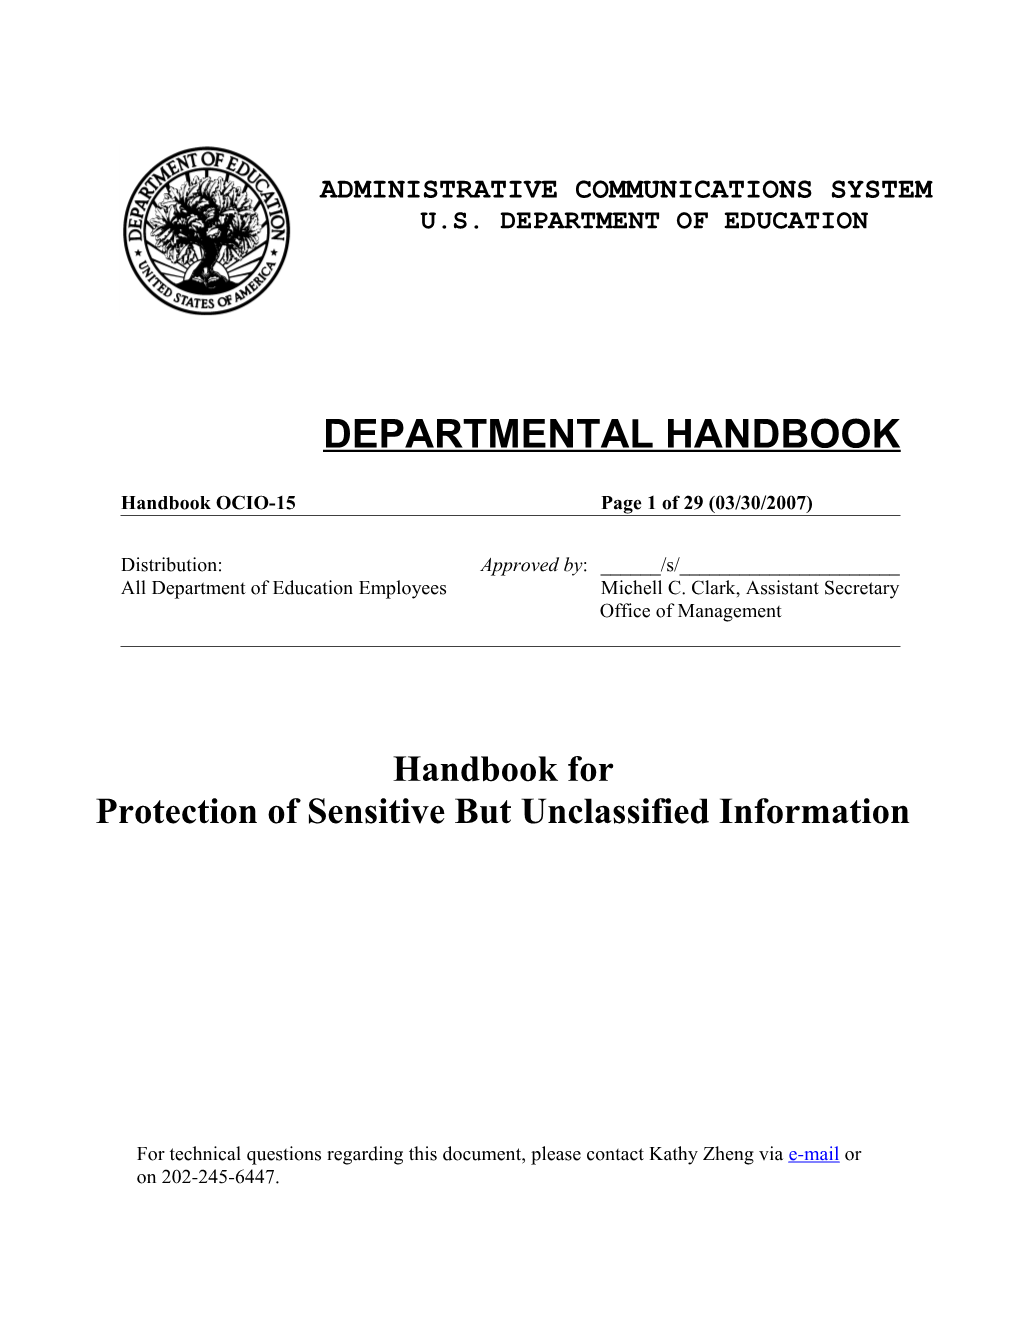 Handbook for Protection of Unclassified Sensitive Information(MS Word)